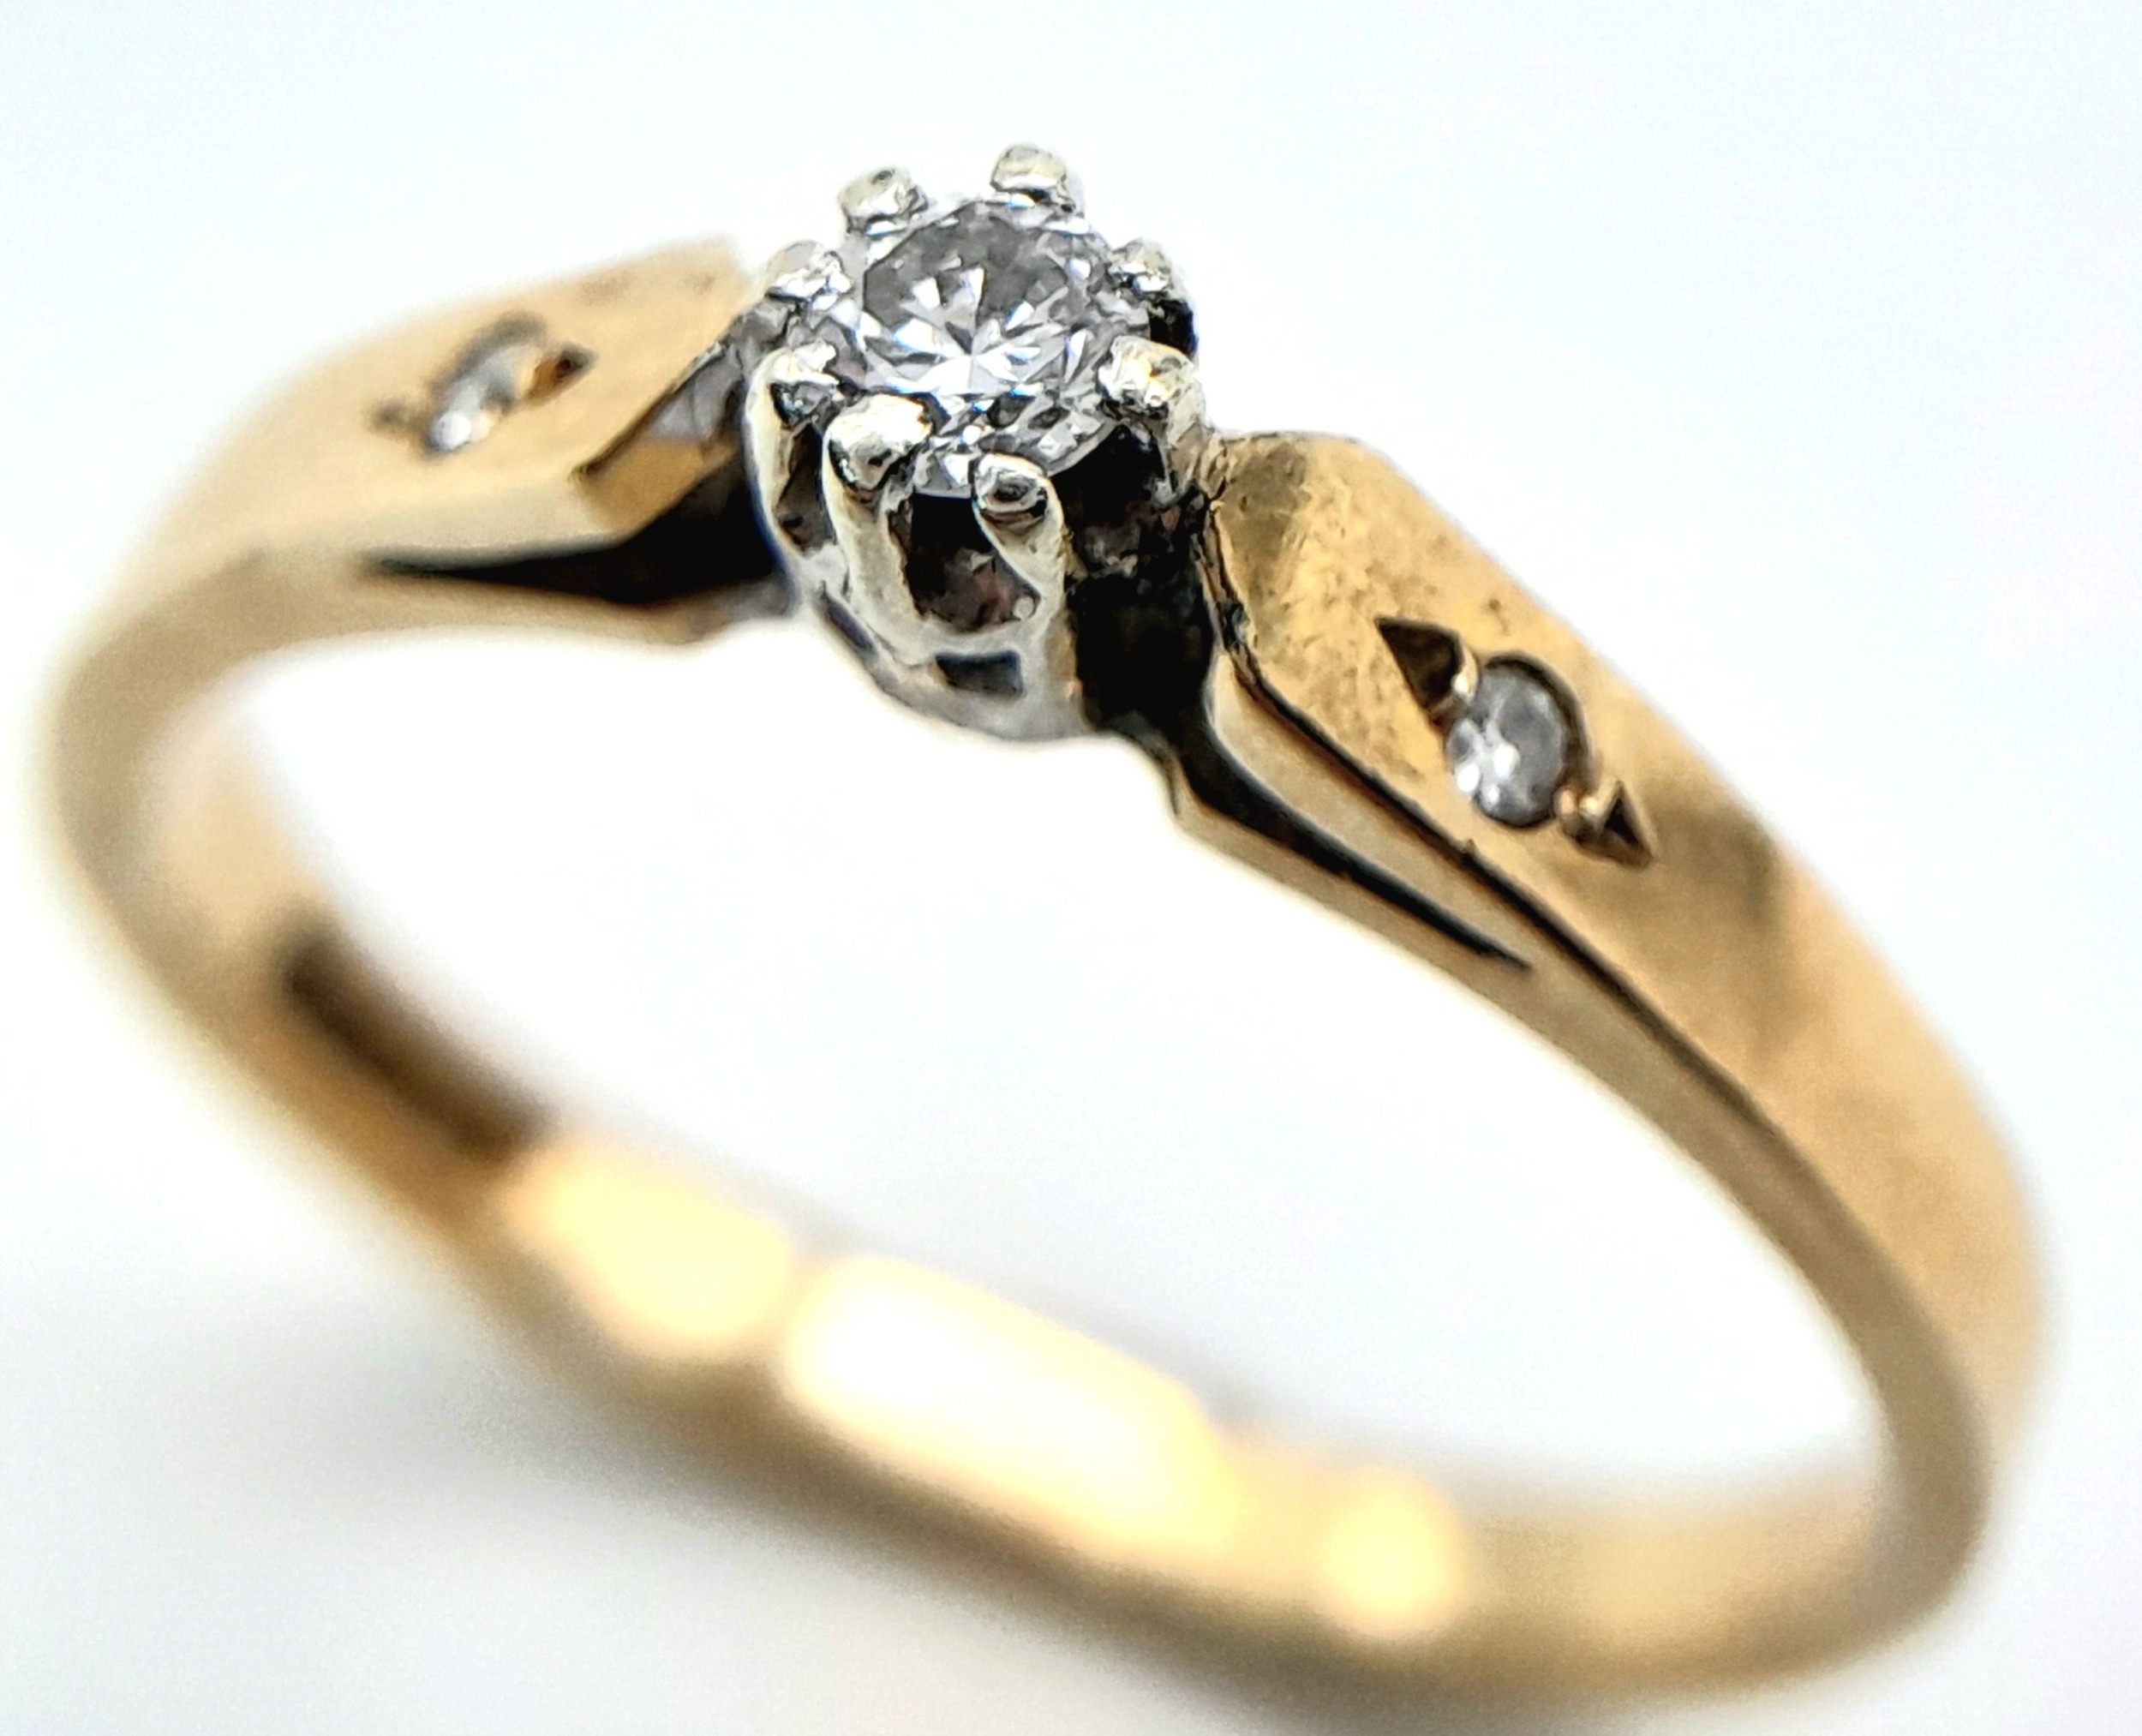 A 9K YELLOW GOLD DIAMOND SOLITAIRE RING. 0.10CT. 1.8G. SIZE N